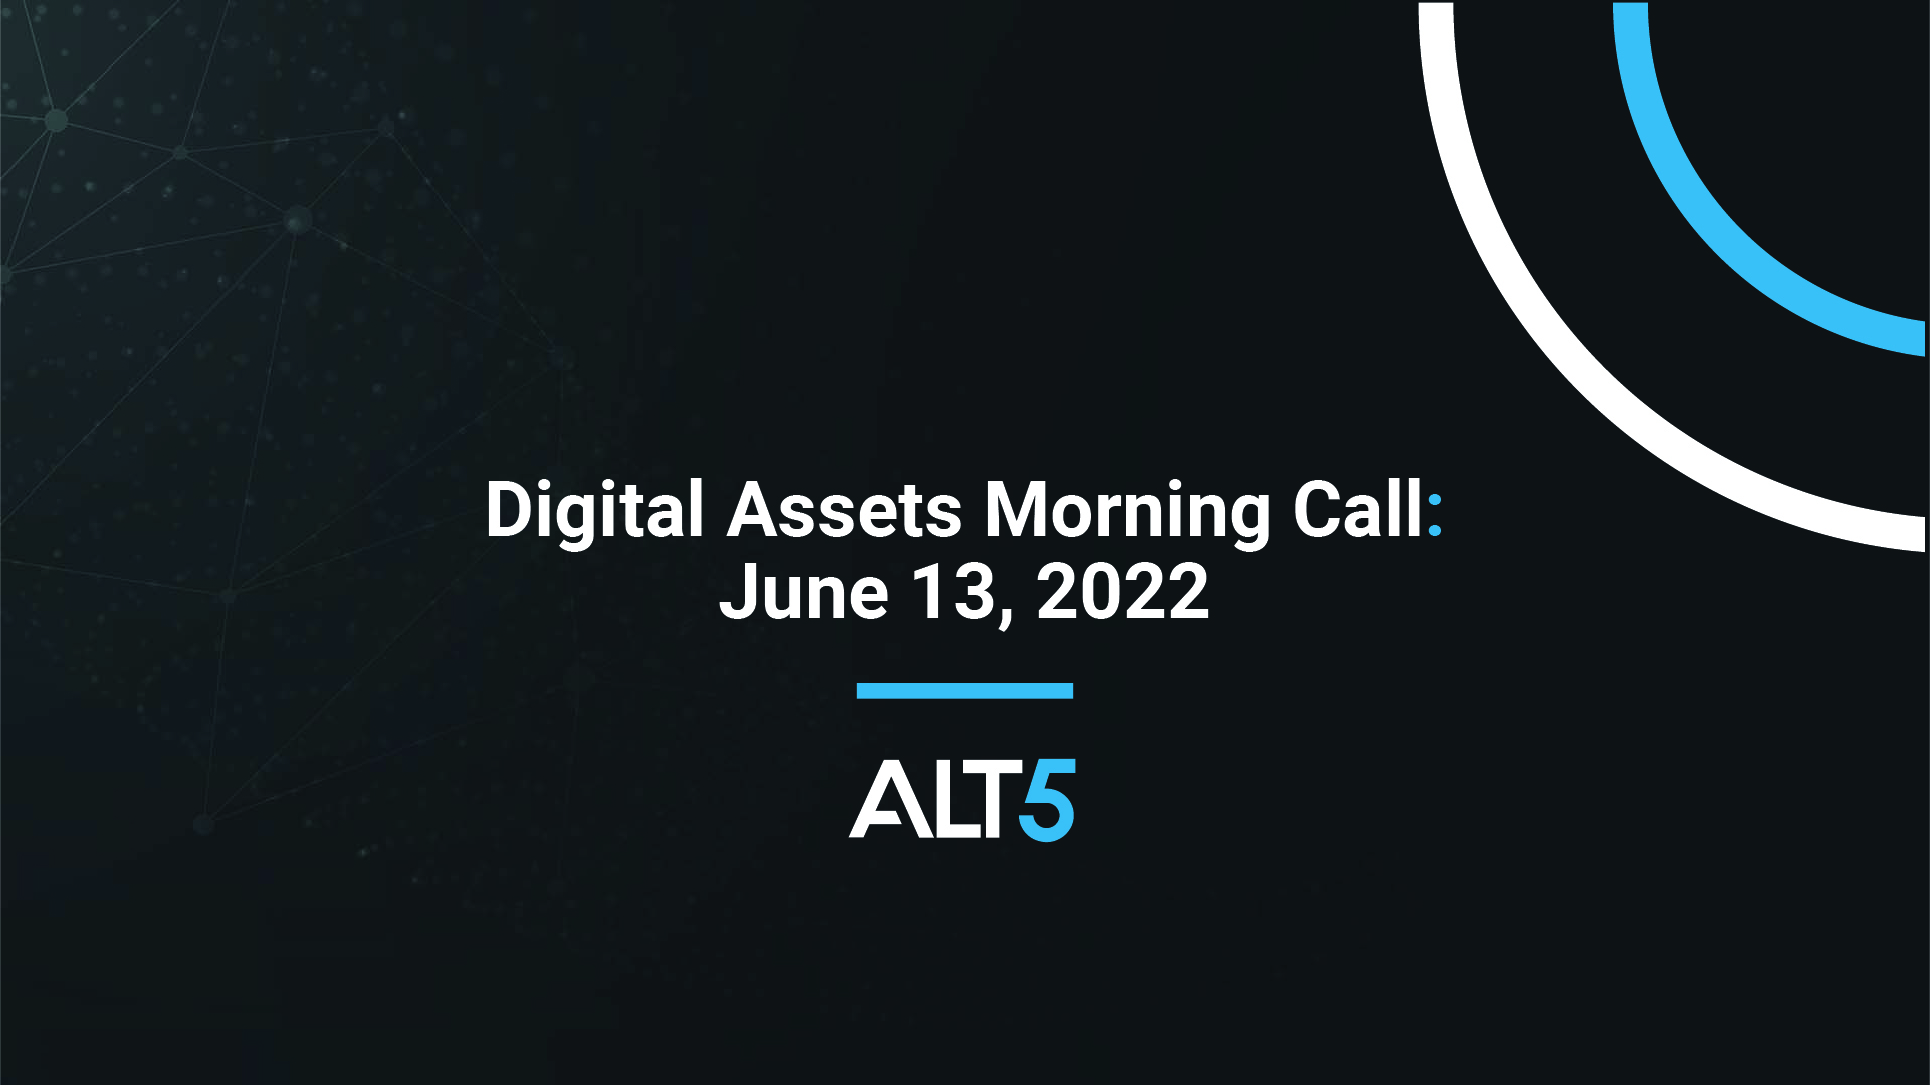 Digital Assets Morning Call: June 13 2022 - Watershed weekend for crypto tokens